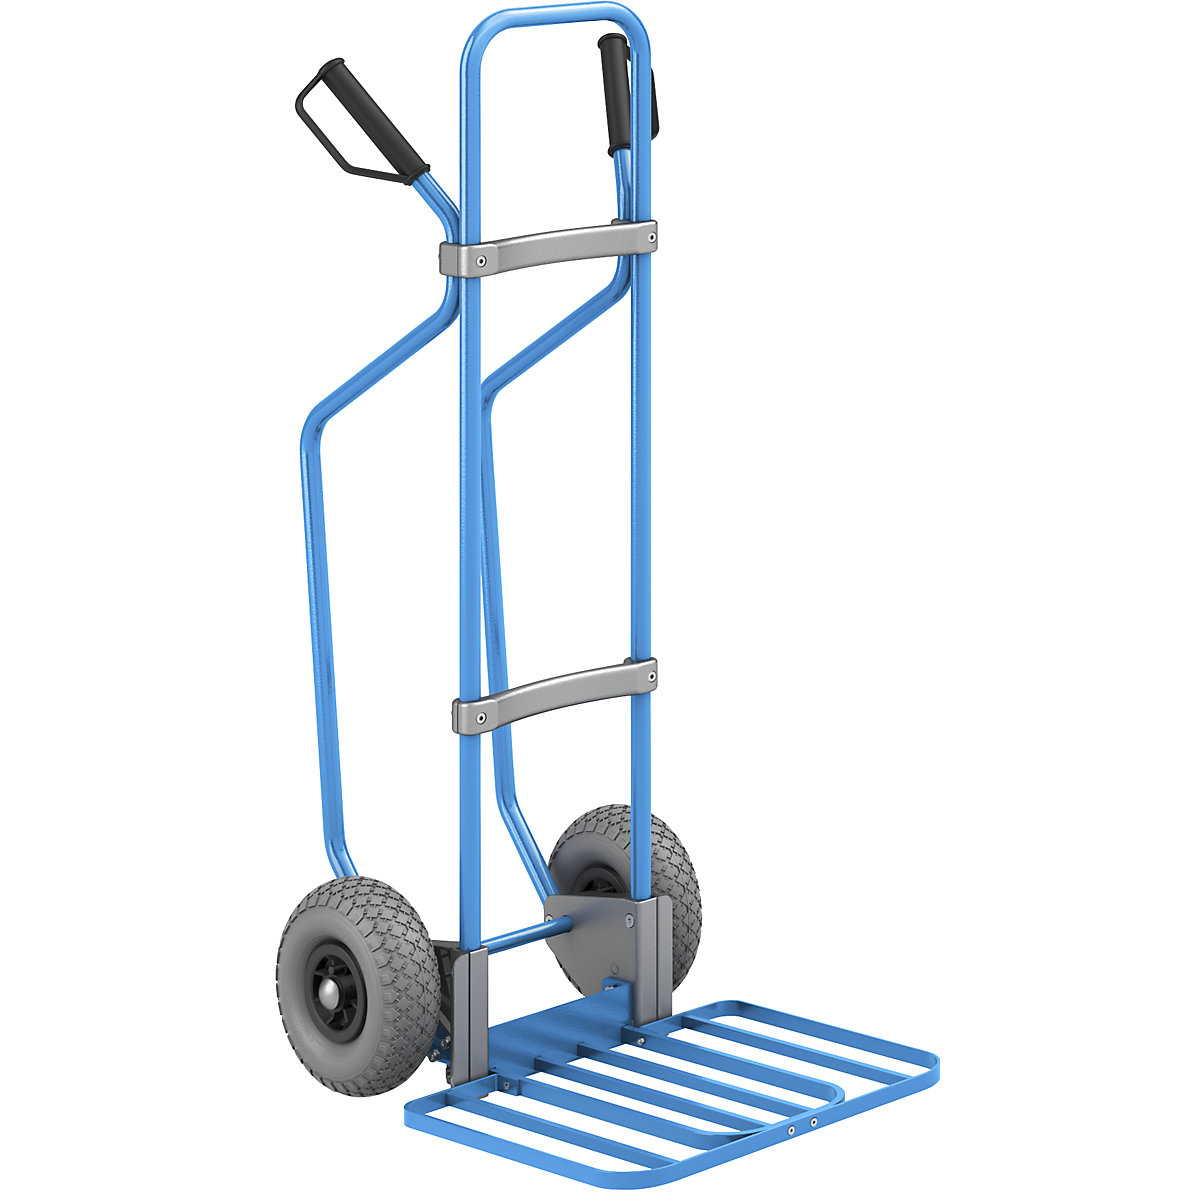 Sack truck with runners, blue – eurokraft pro, parcel footplate WxD 430 x 450 mm, blue, PU tyres-3